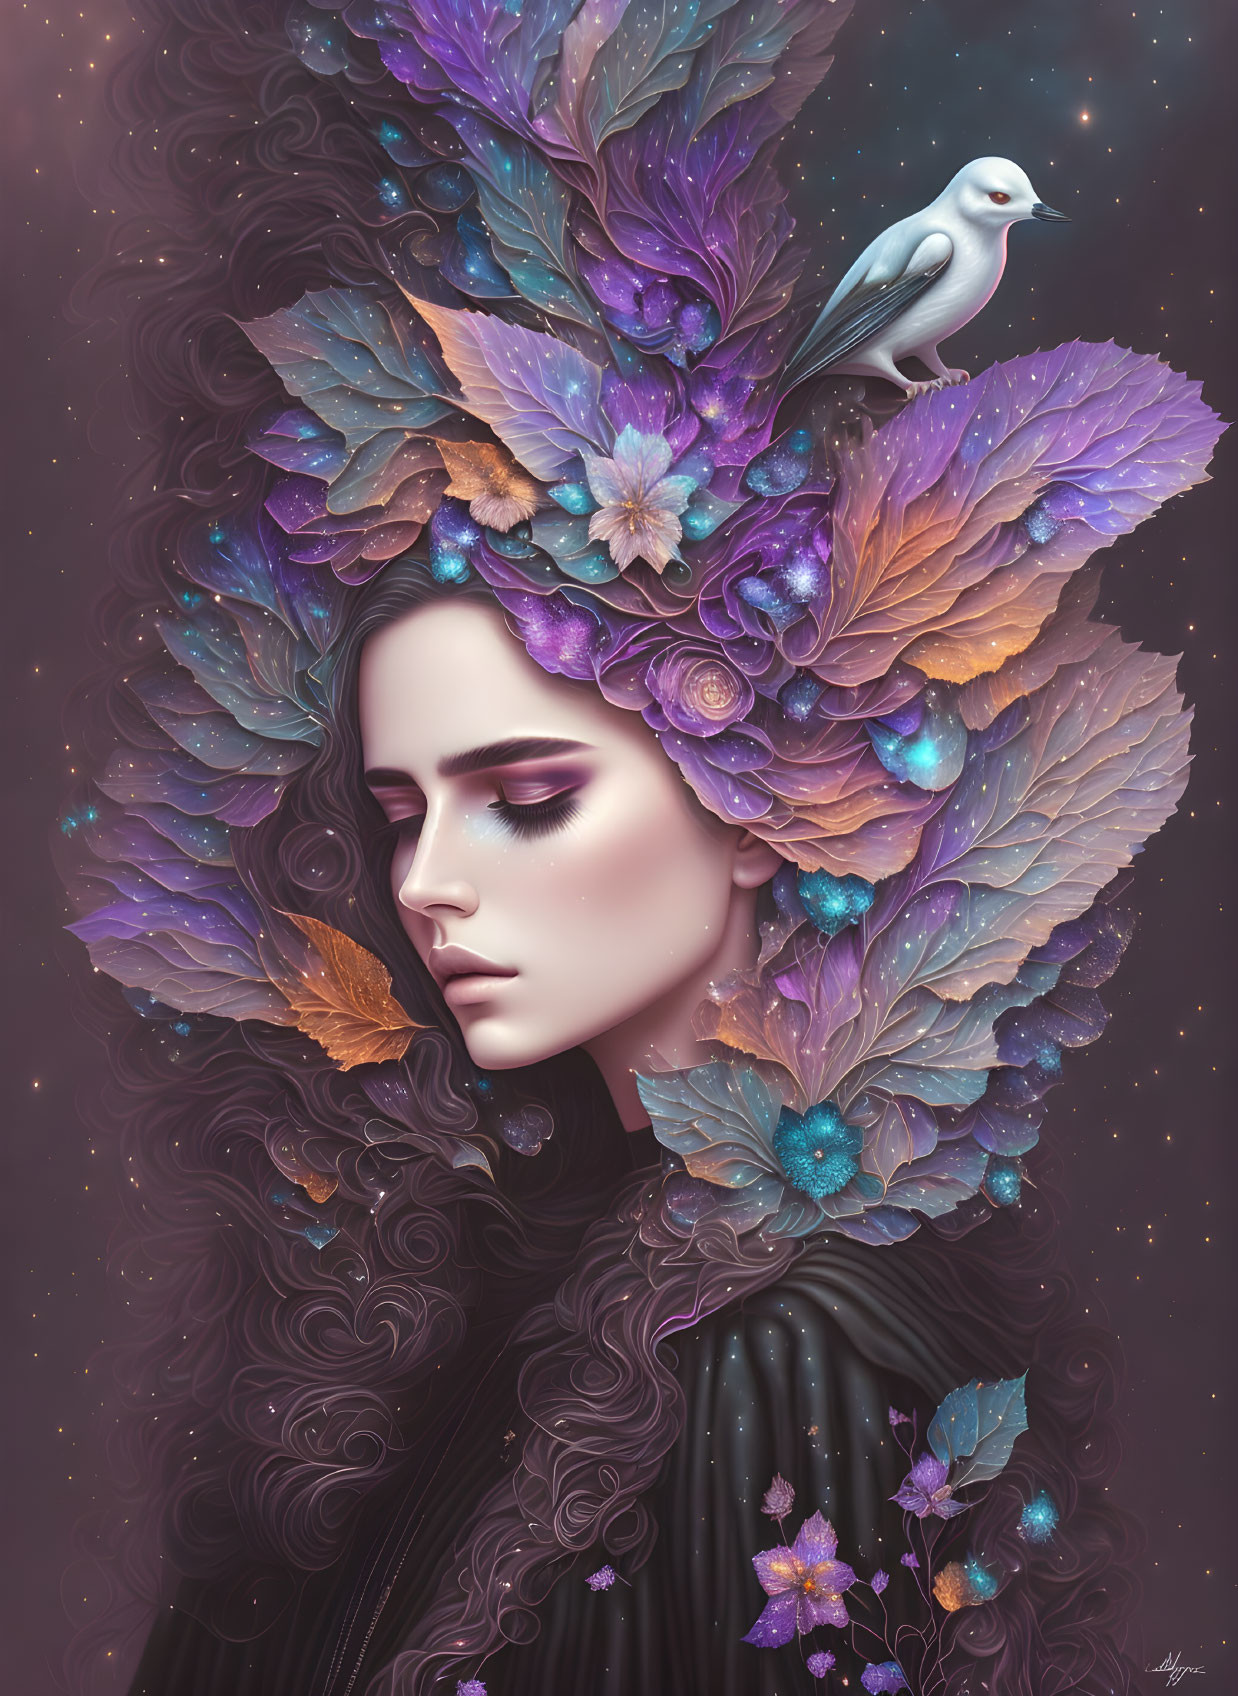 Surreal portrait of woman with purple and bronze leaves, flowers, and bird in hair, against